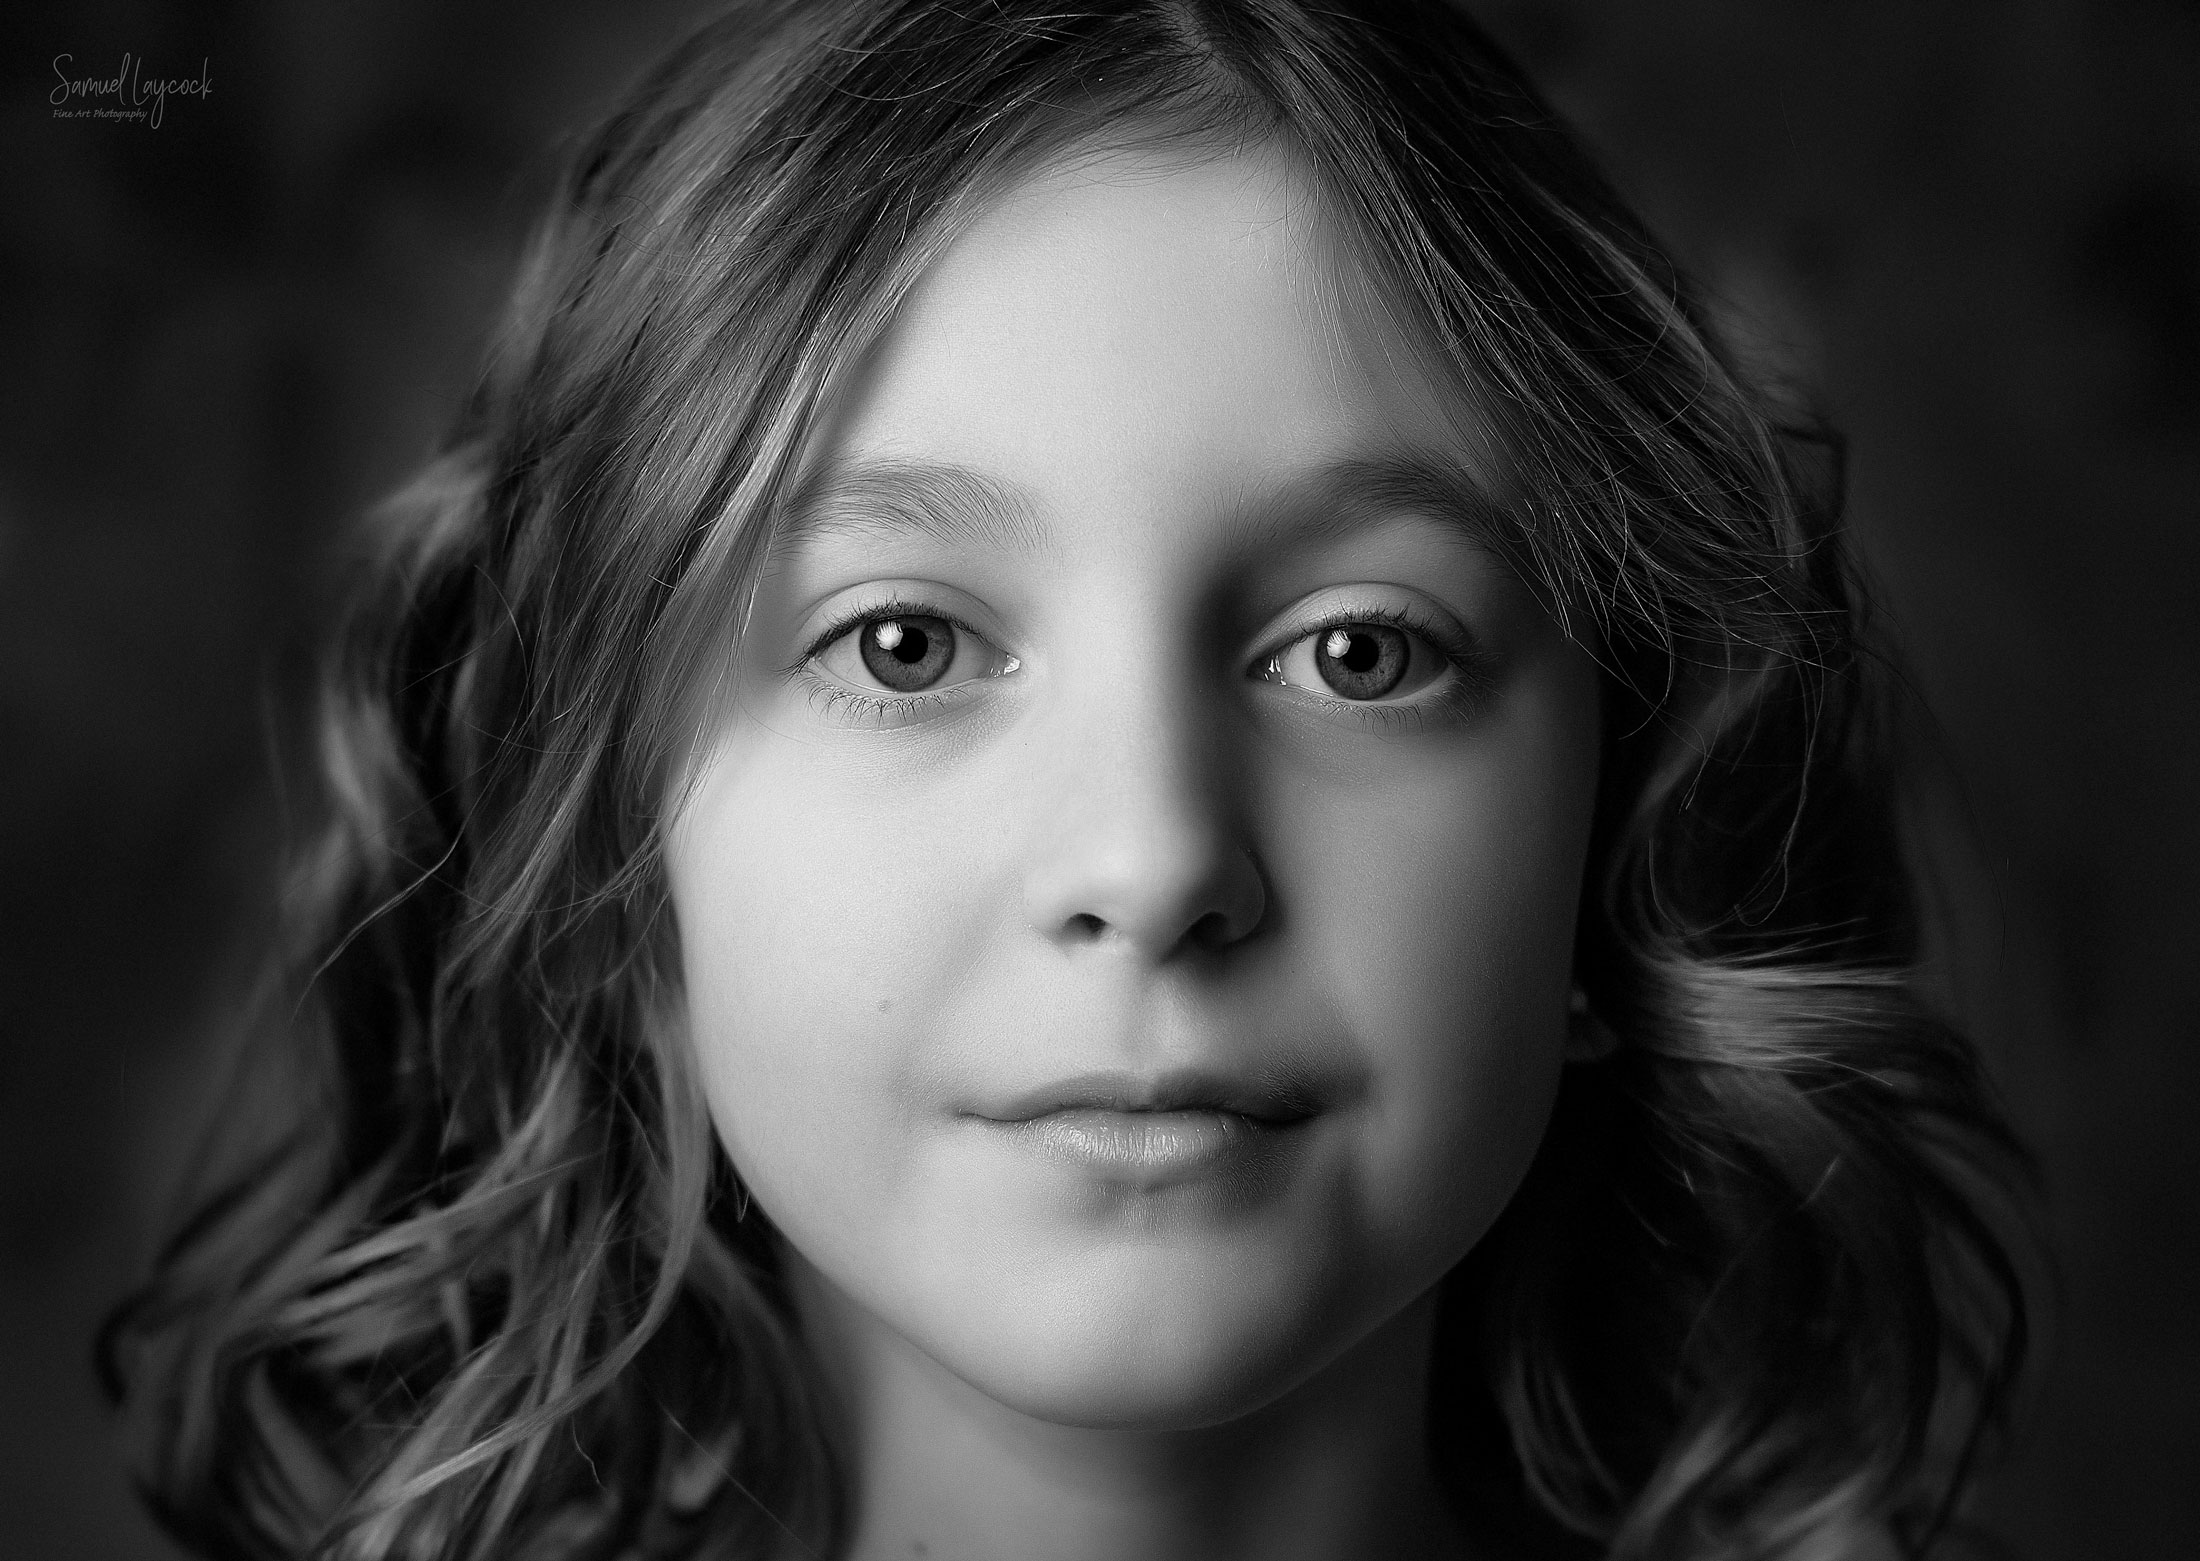 Young girl close to the camera with beautiful eyes